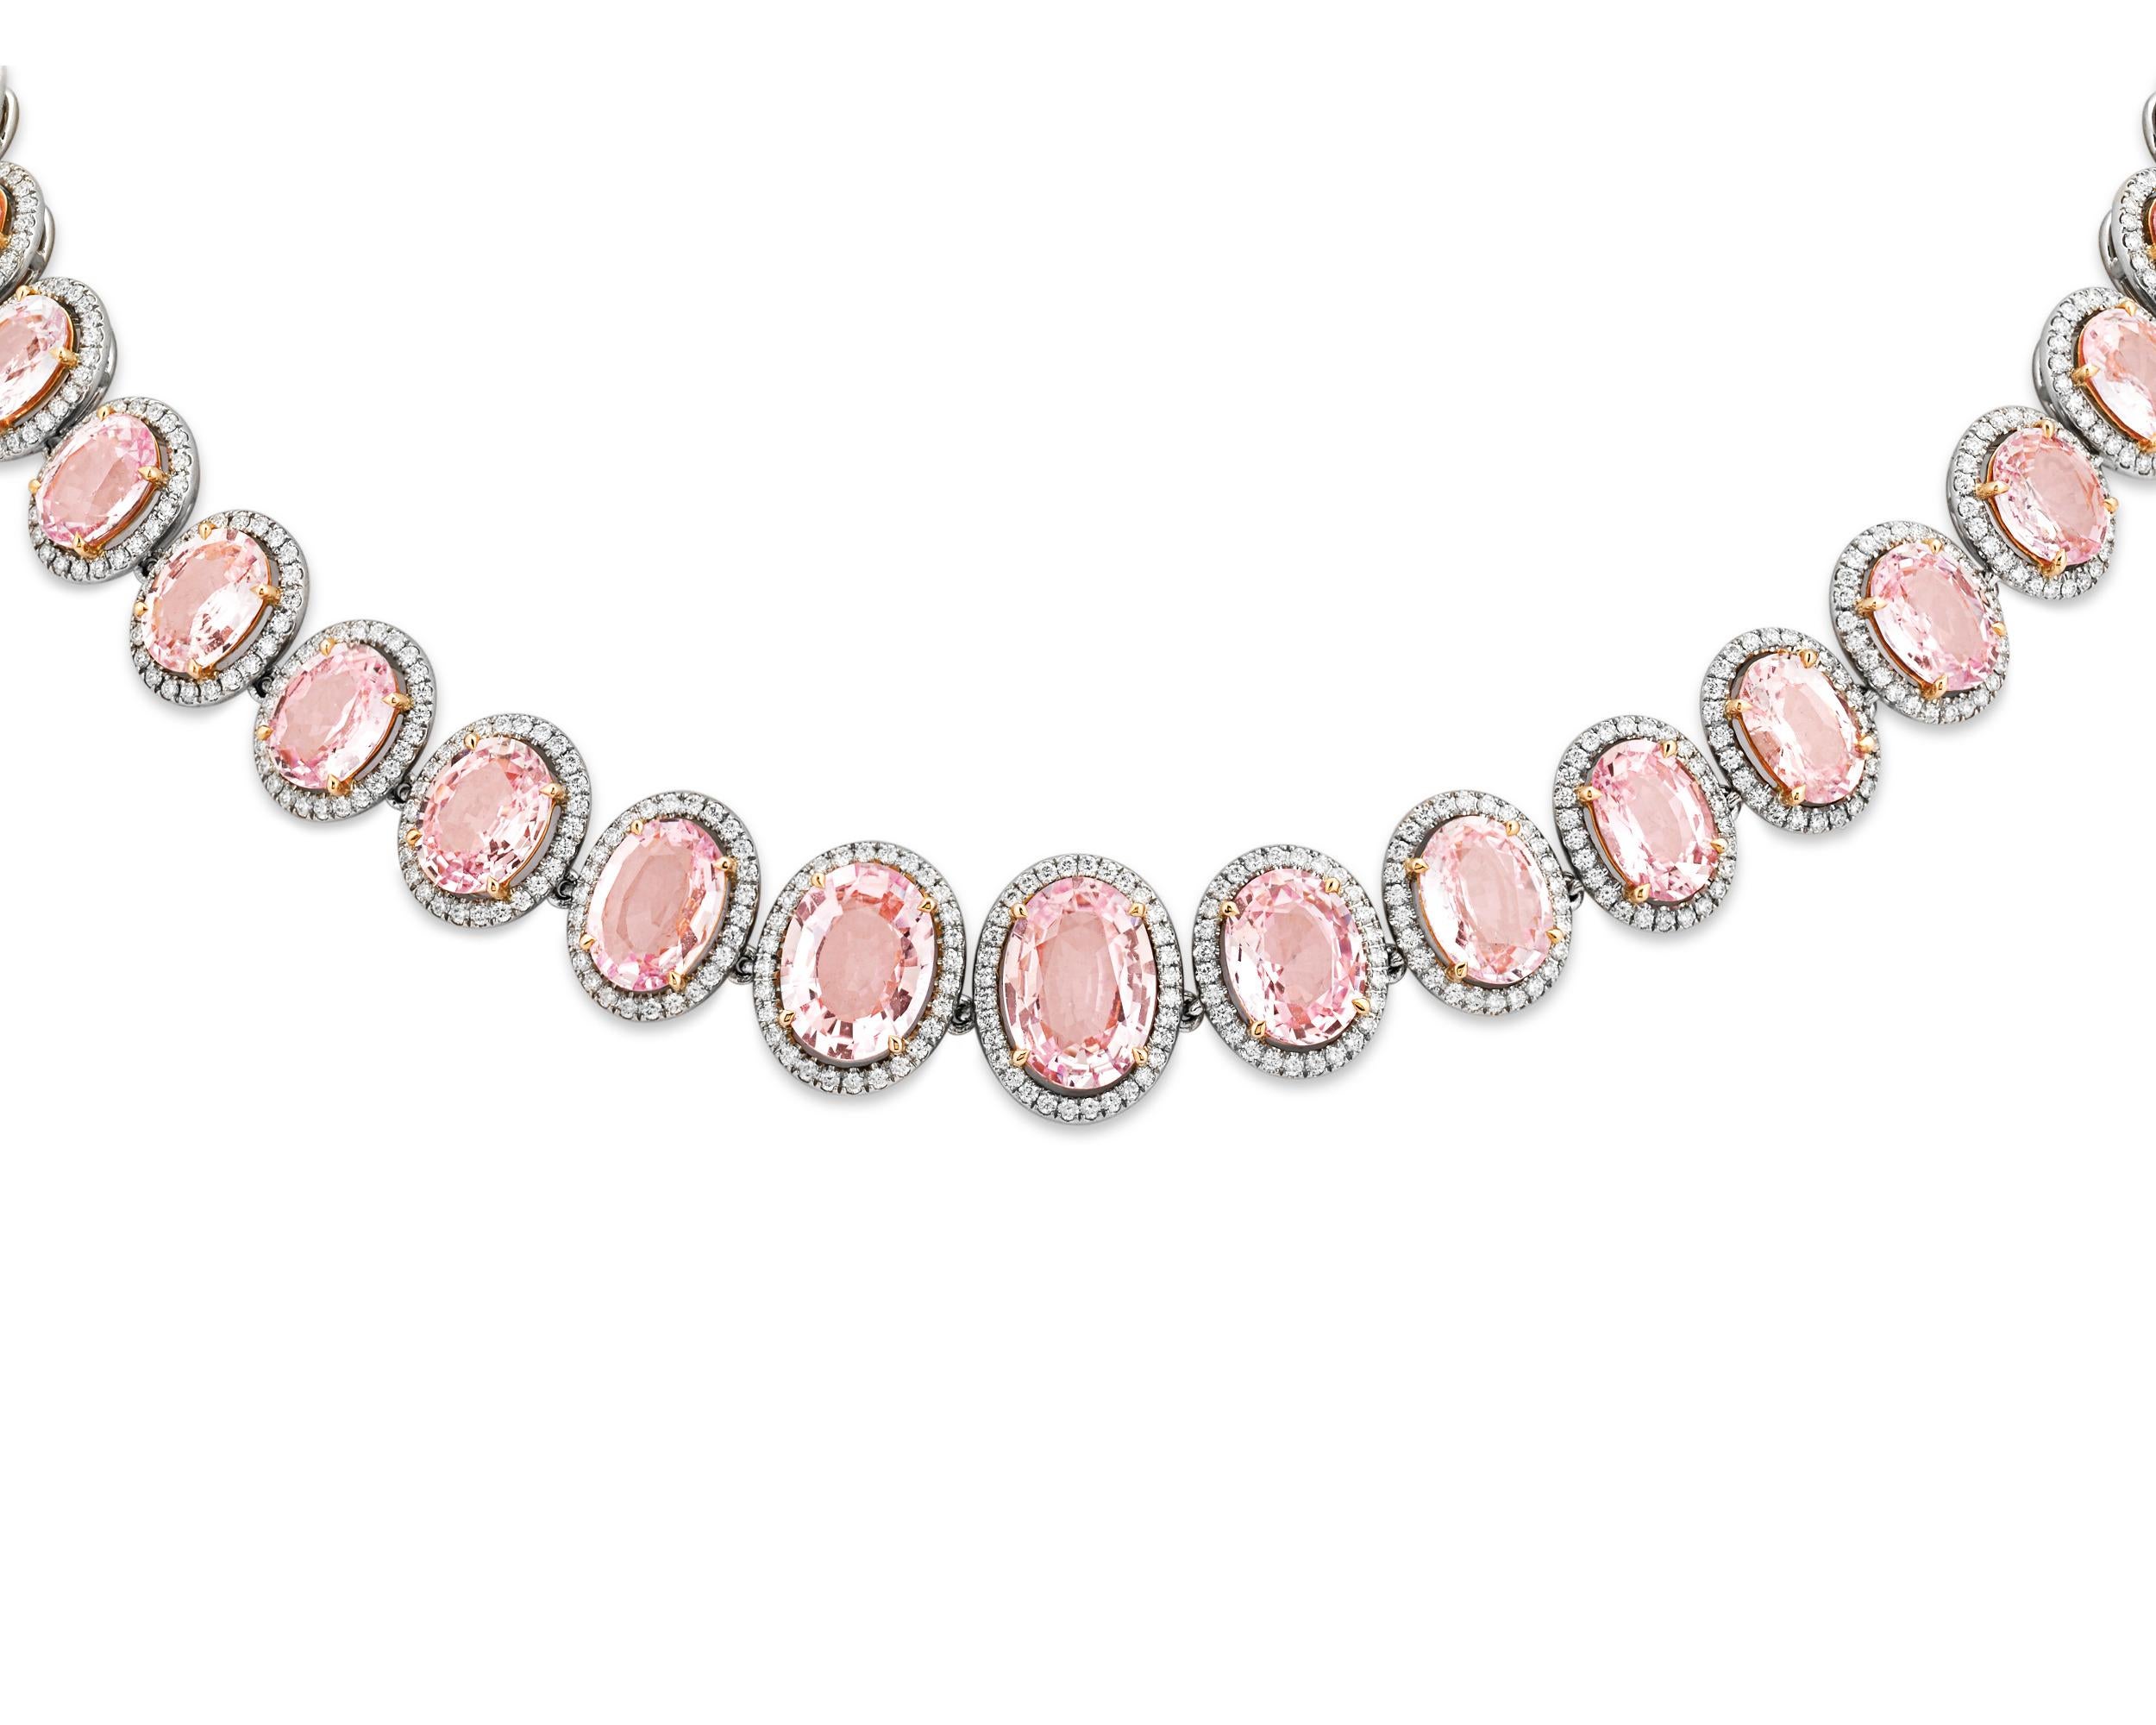 Forty-one of the rarest of all sapphires - the Padparadscha sapphire - dazzle in this dramatic necklace. Totaling 58.31 carats, the gems exhibit the superb pastel orangy-pink color that makes these stones so highly coveted. The sapphires are